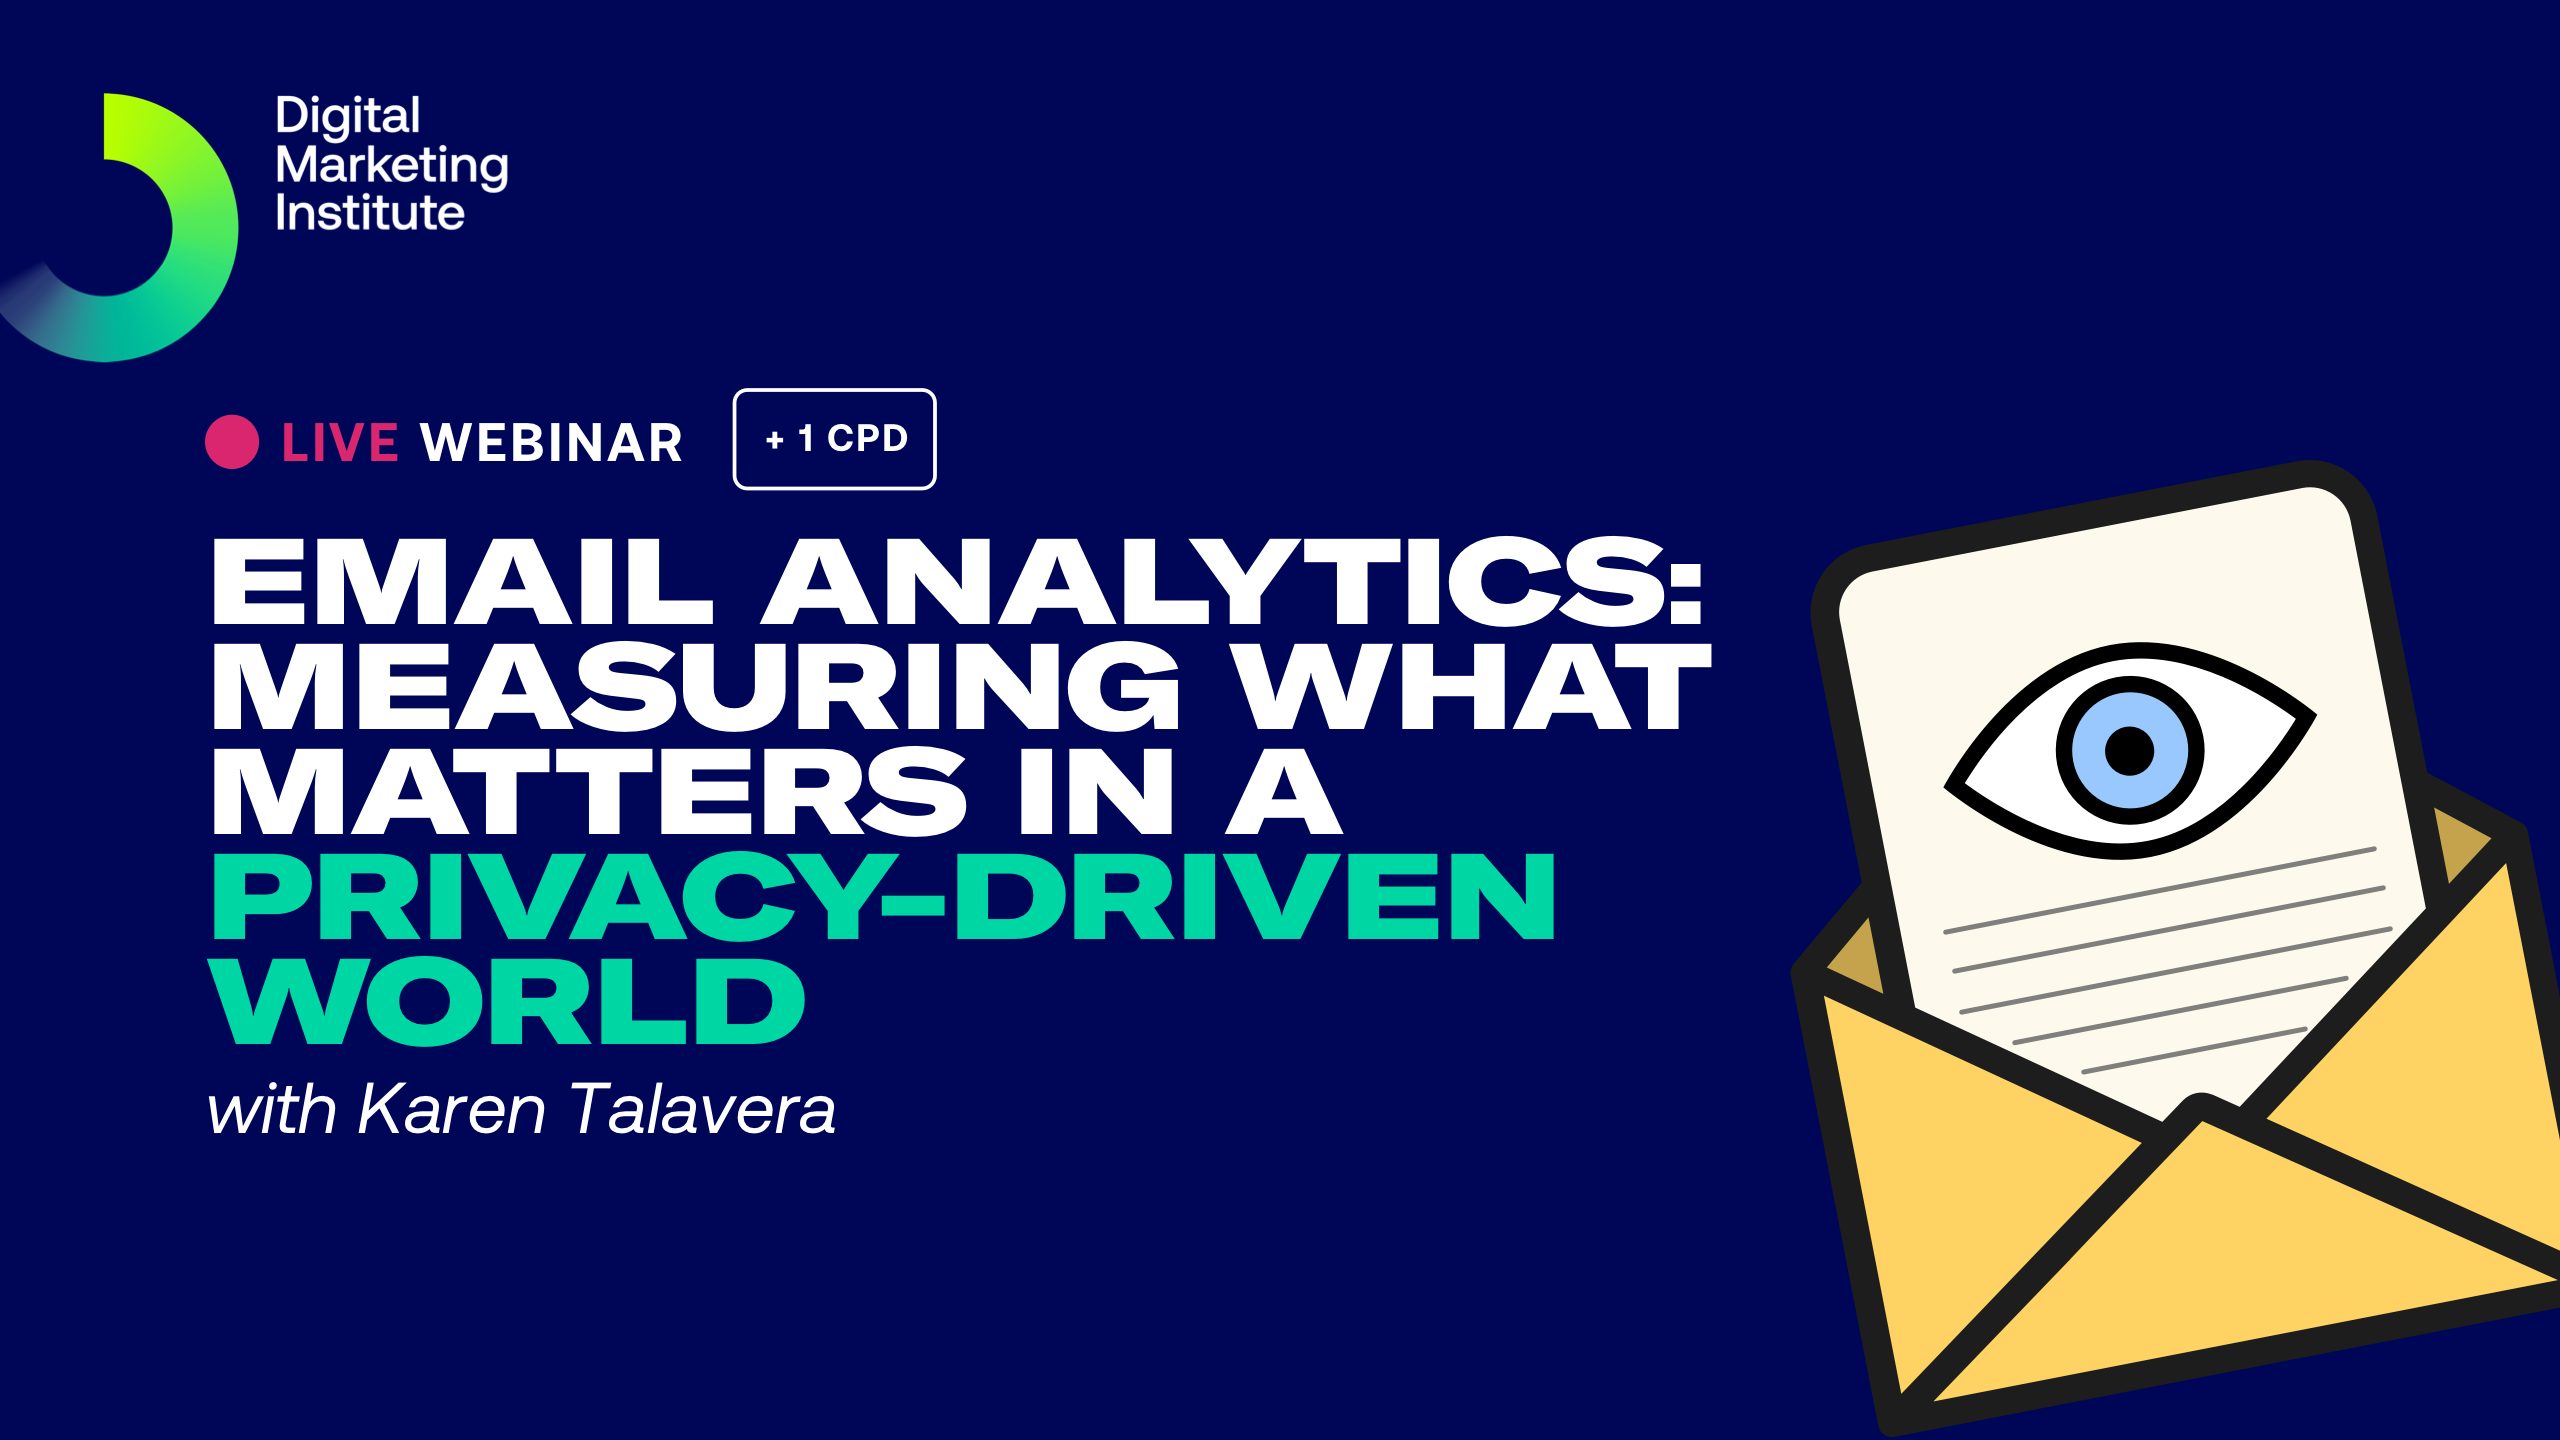 Email Analytics: Measuring What Matters in a Privacy-Driven World with Karen Talavera